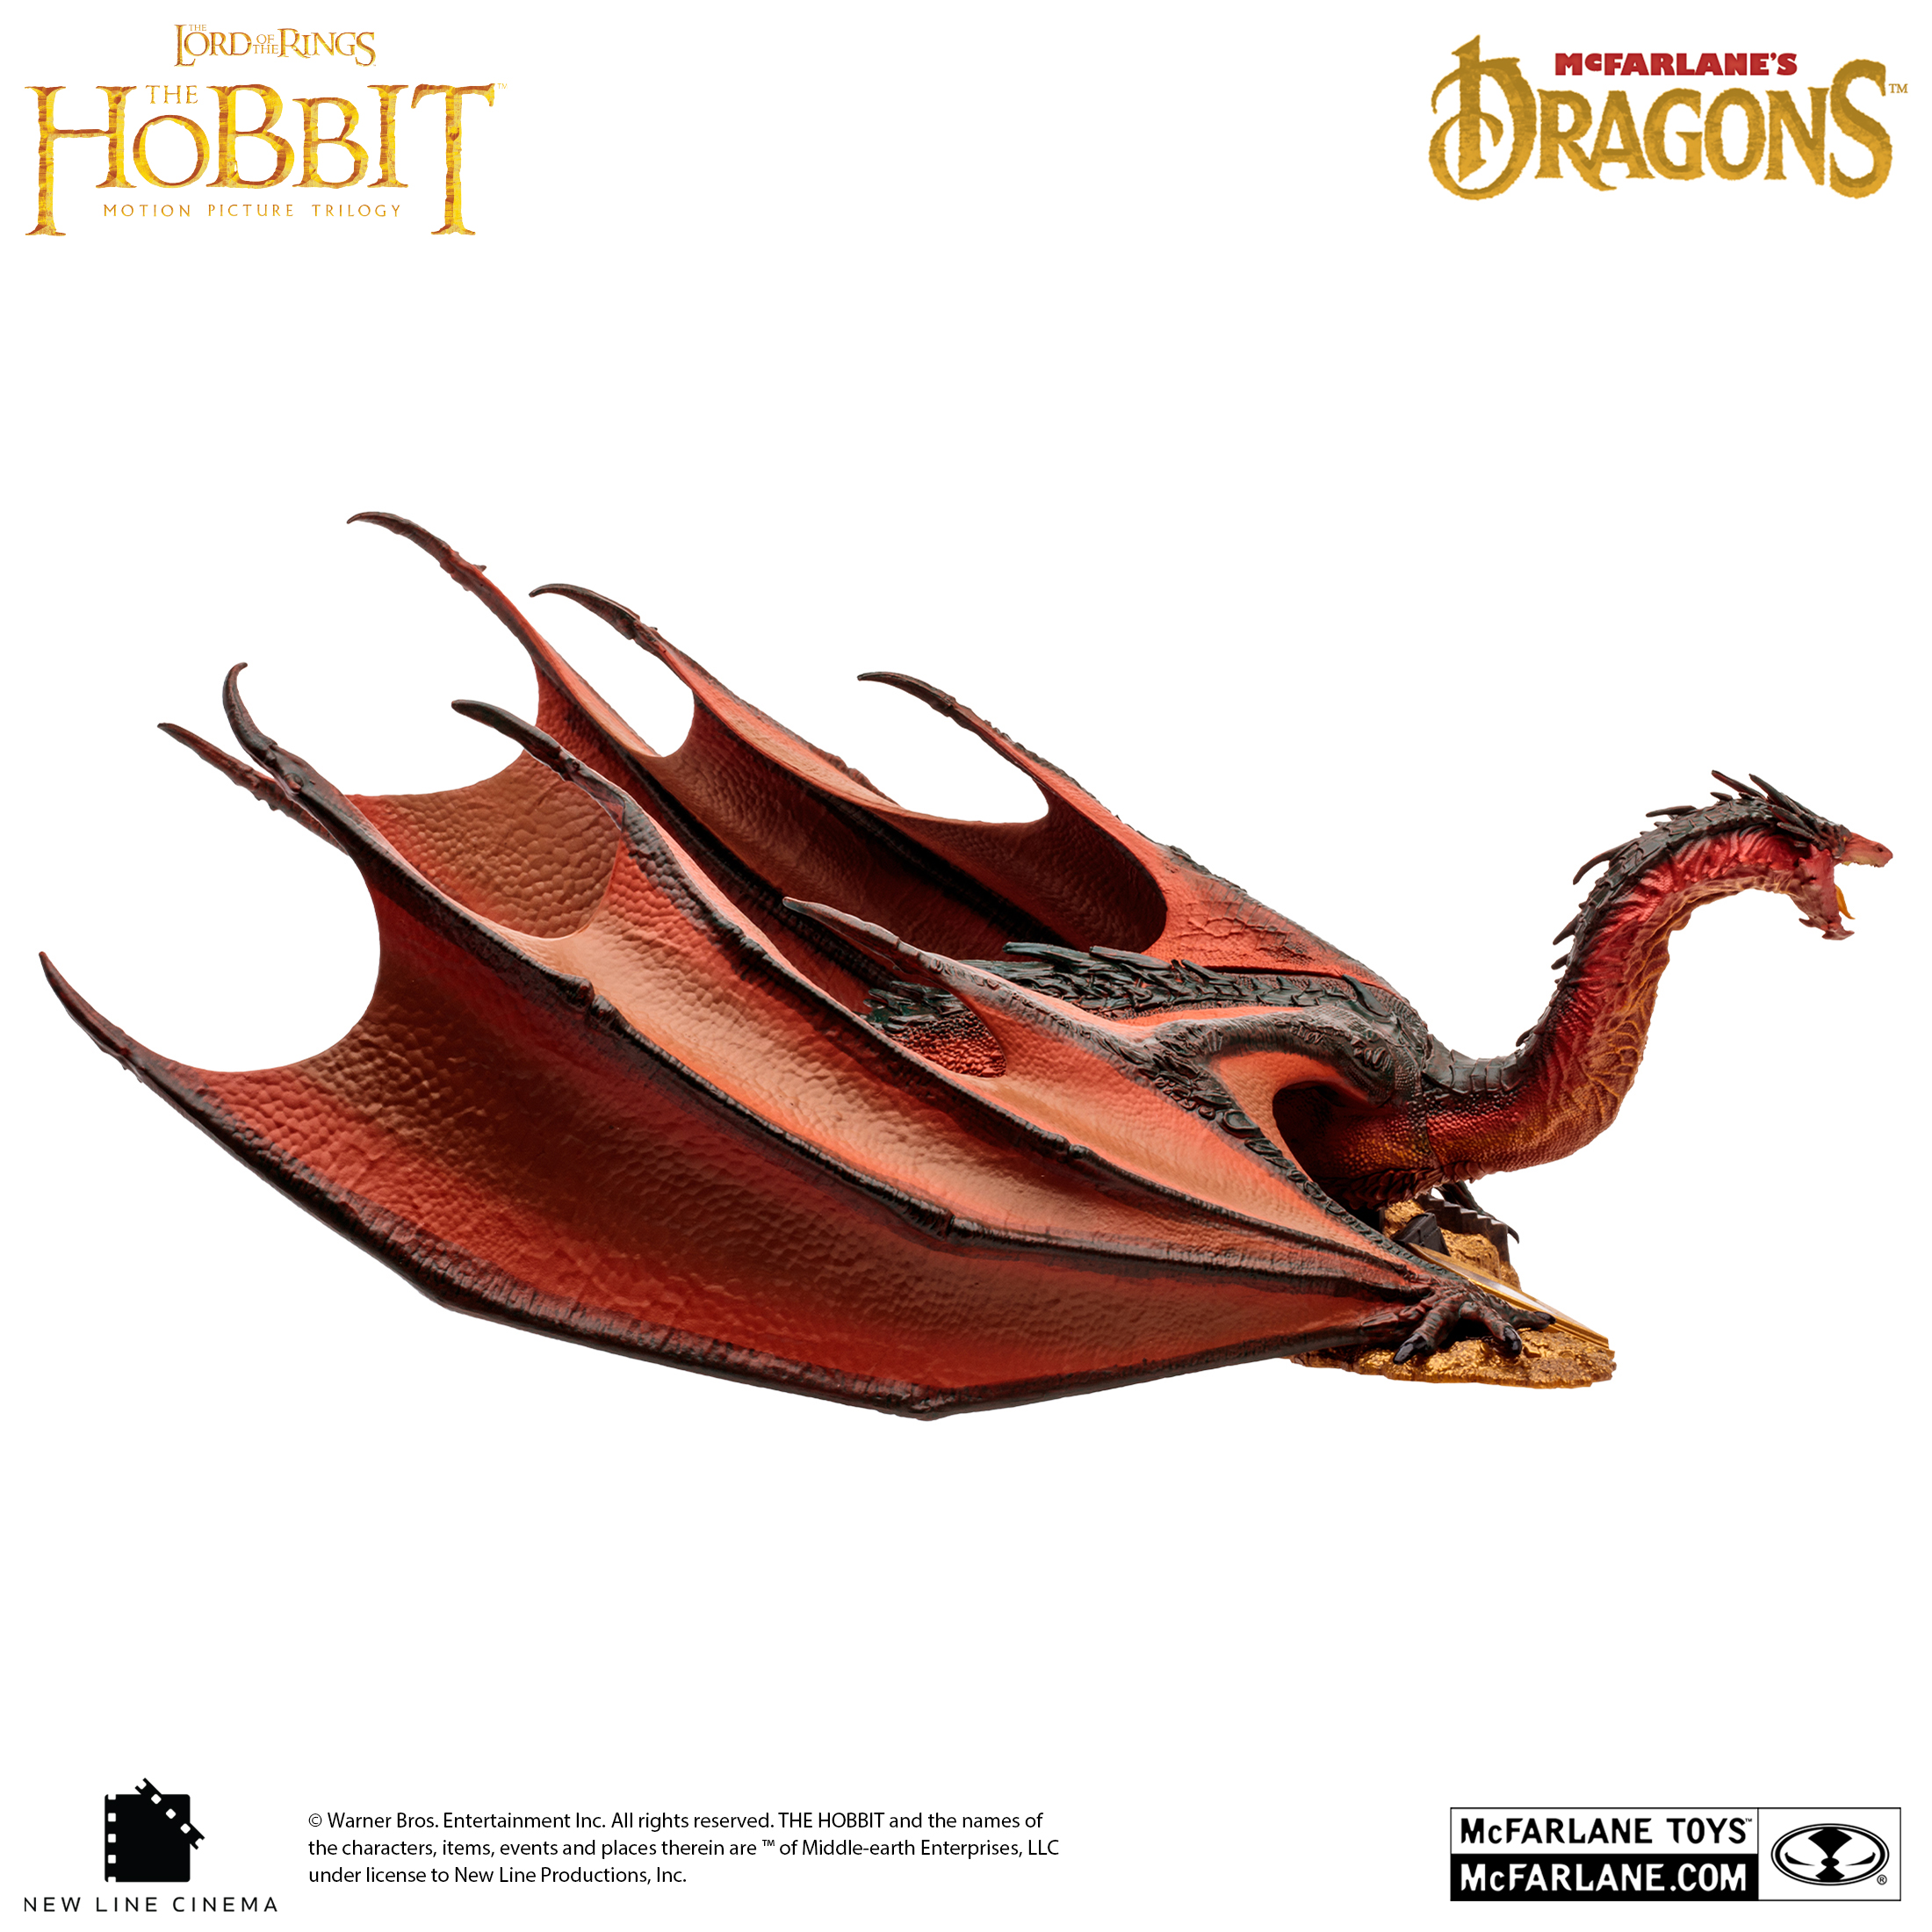 Smaug, the Dragon in the Hobbit